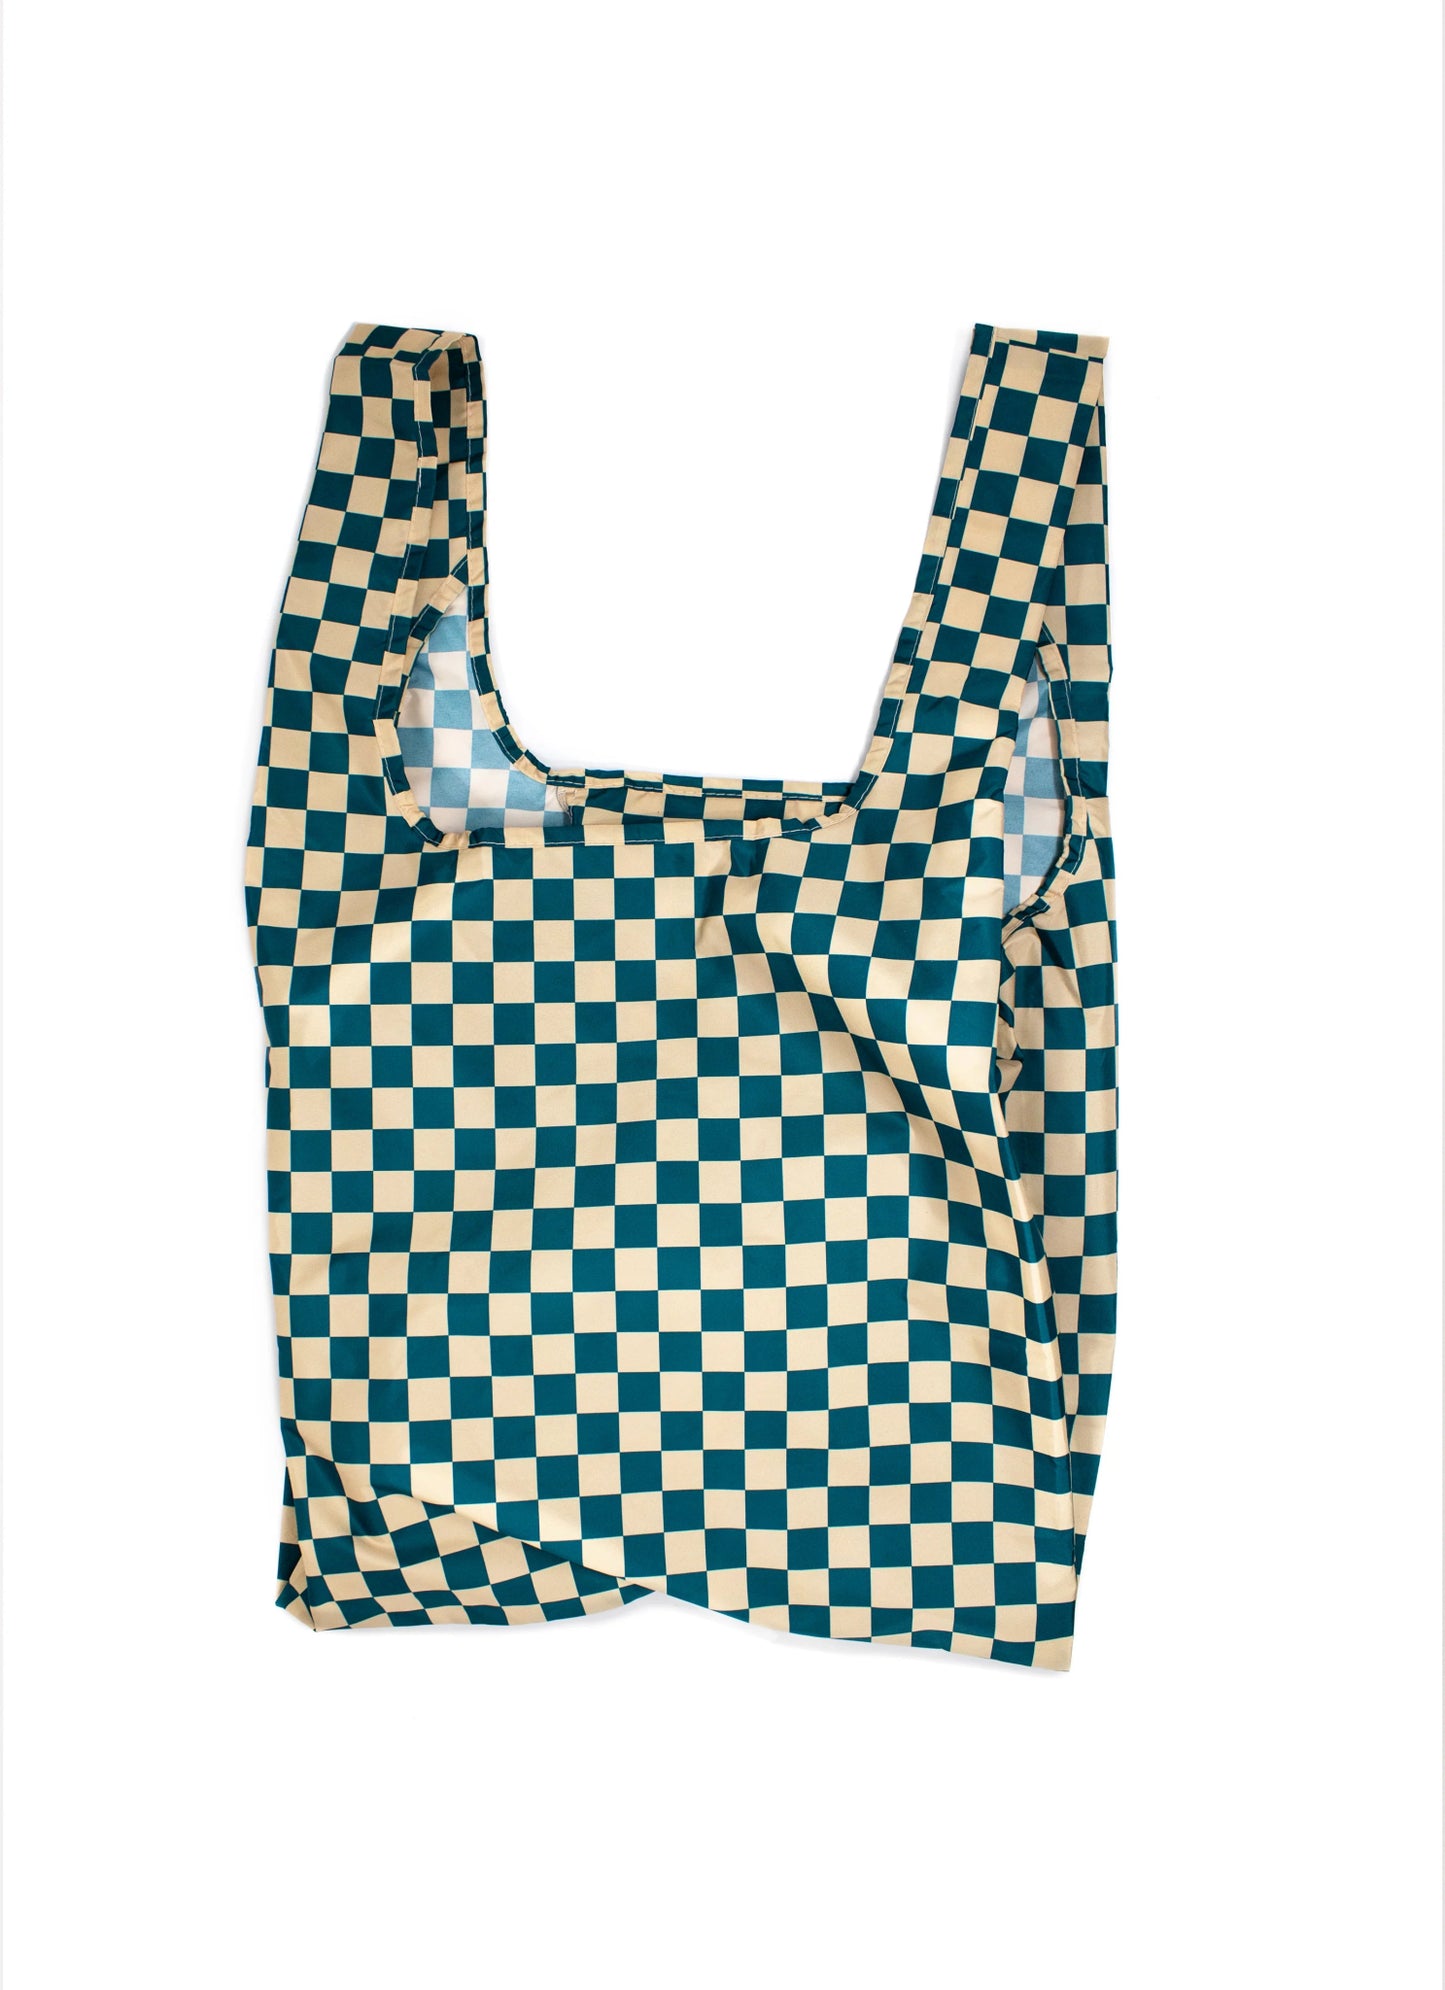 Reusable Tote Bags - oh-eco